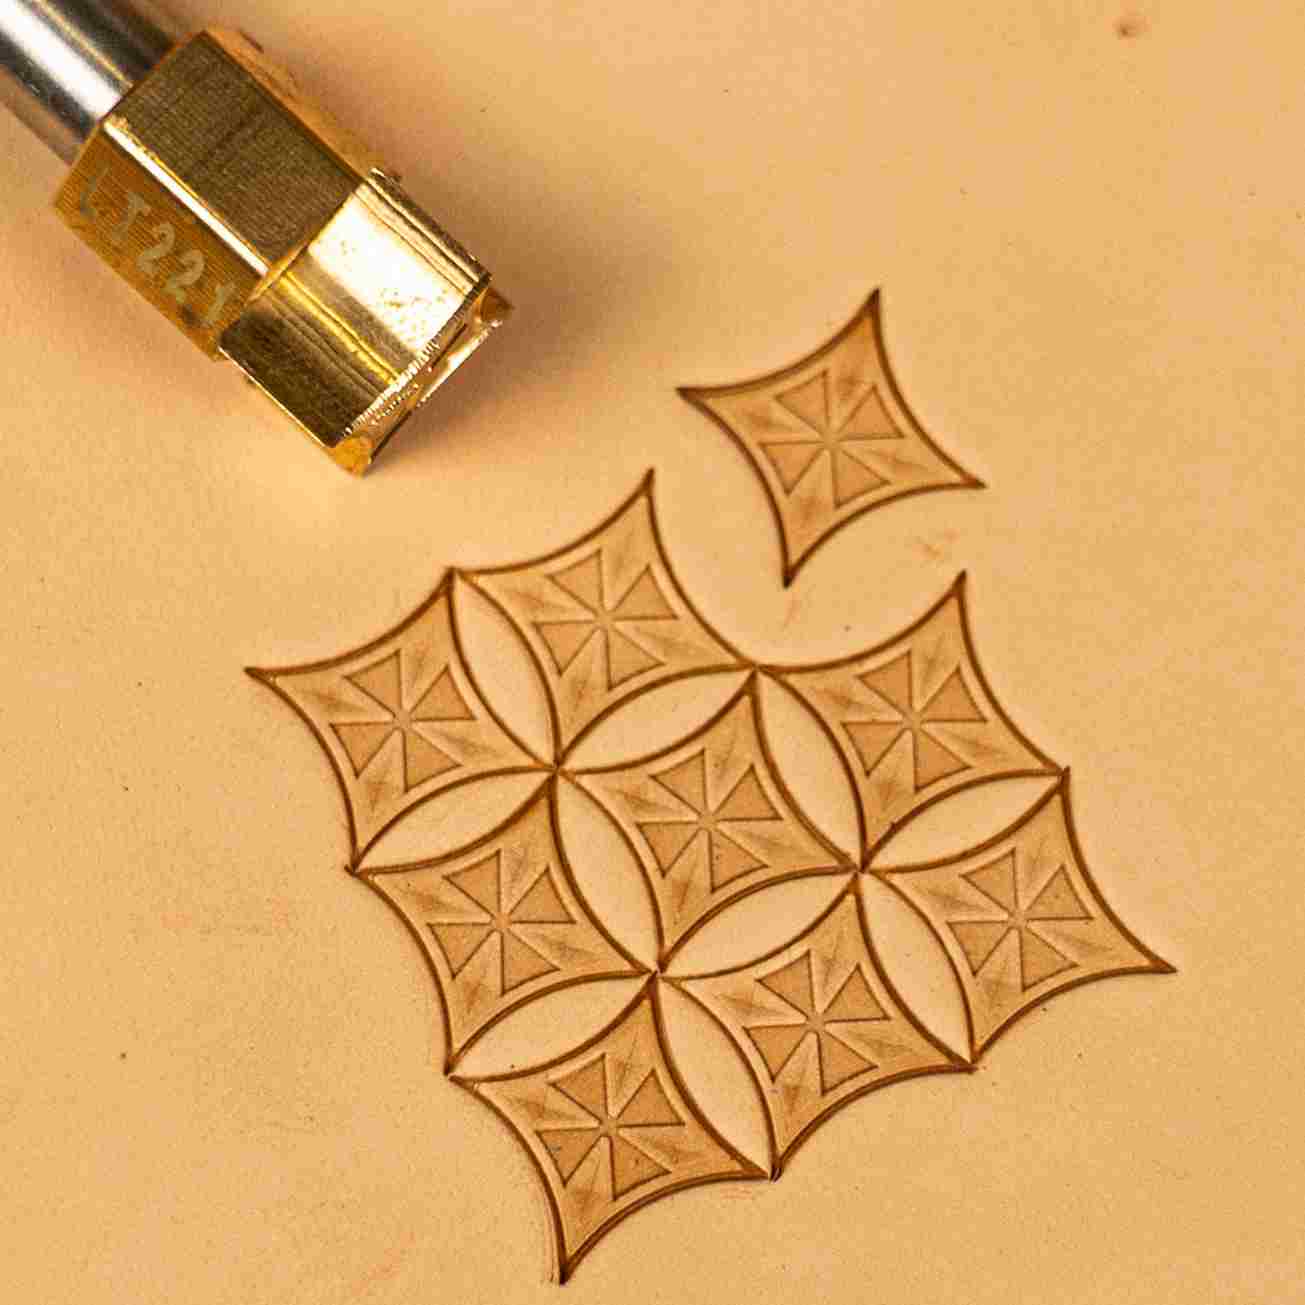 LT221 Premium Leather Stamping Tools for Professional Crafters - 15x15mm size